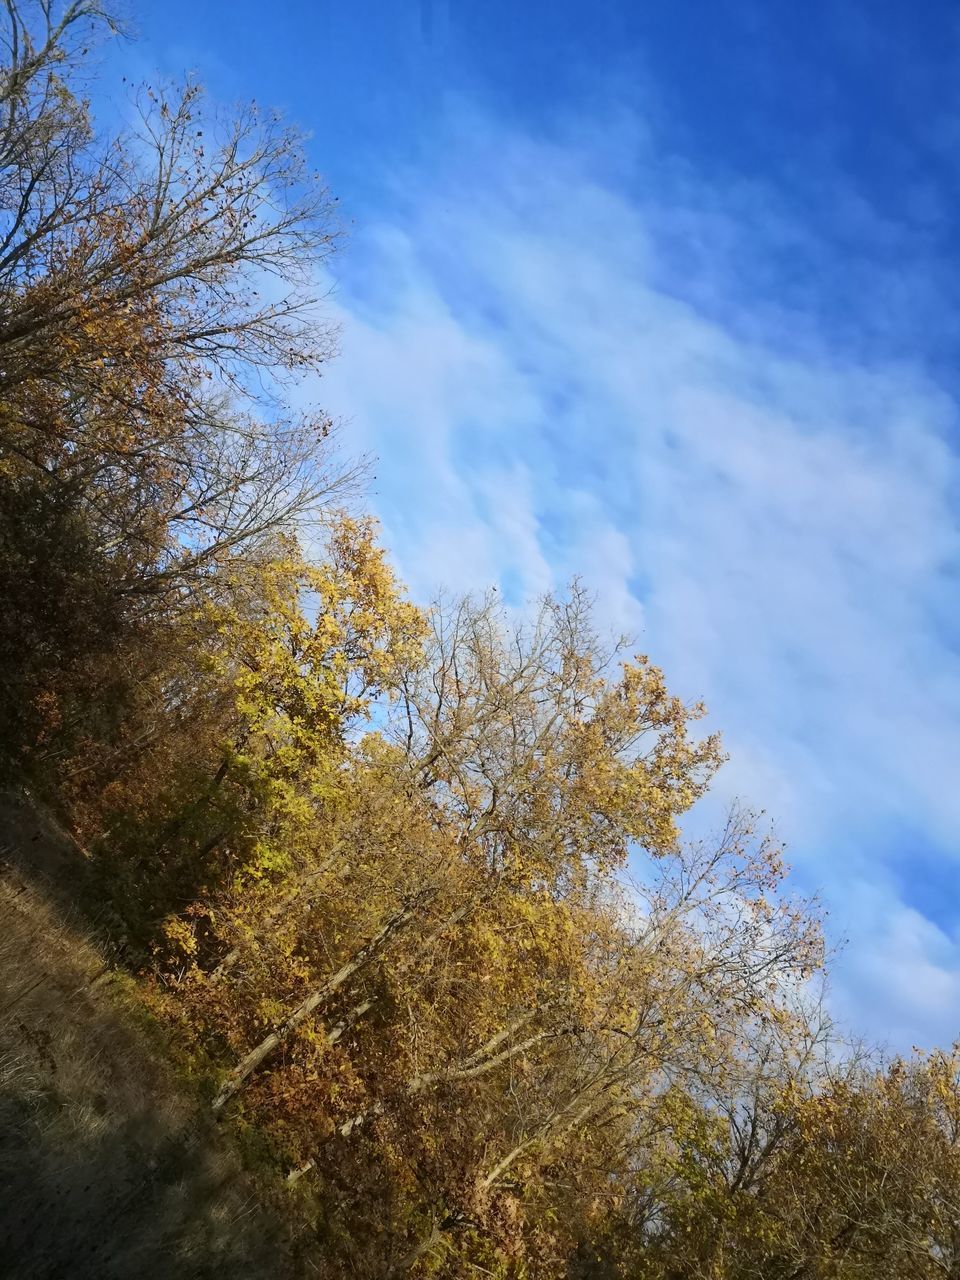 nature, tree, sky, plant, sunlight, leaf, autumn, cloud, beauty in nature, low angle view, no people, growth, blue, morning, grass, tranquility, day, outdoors, scenics - nature, forest, branch, land, environment, tranquil scene, non-urban scene, reflection, flower